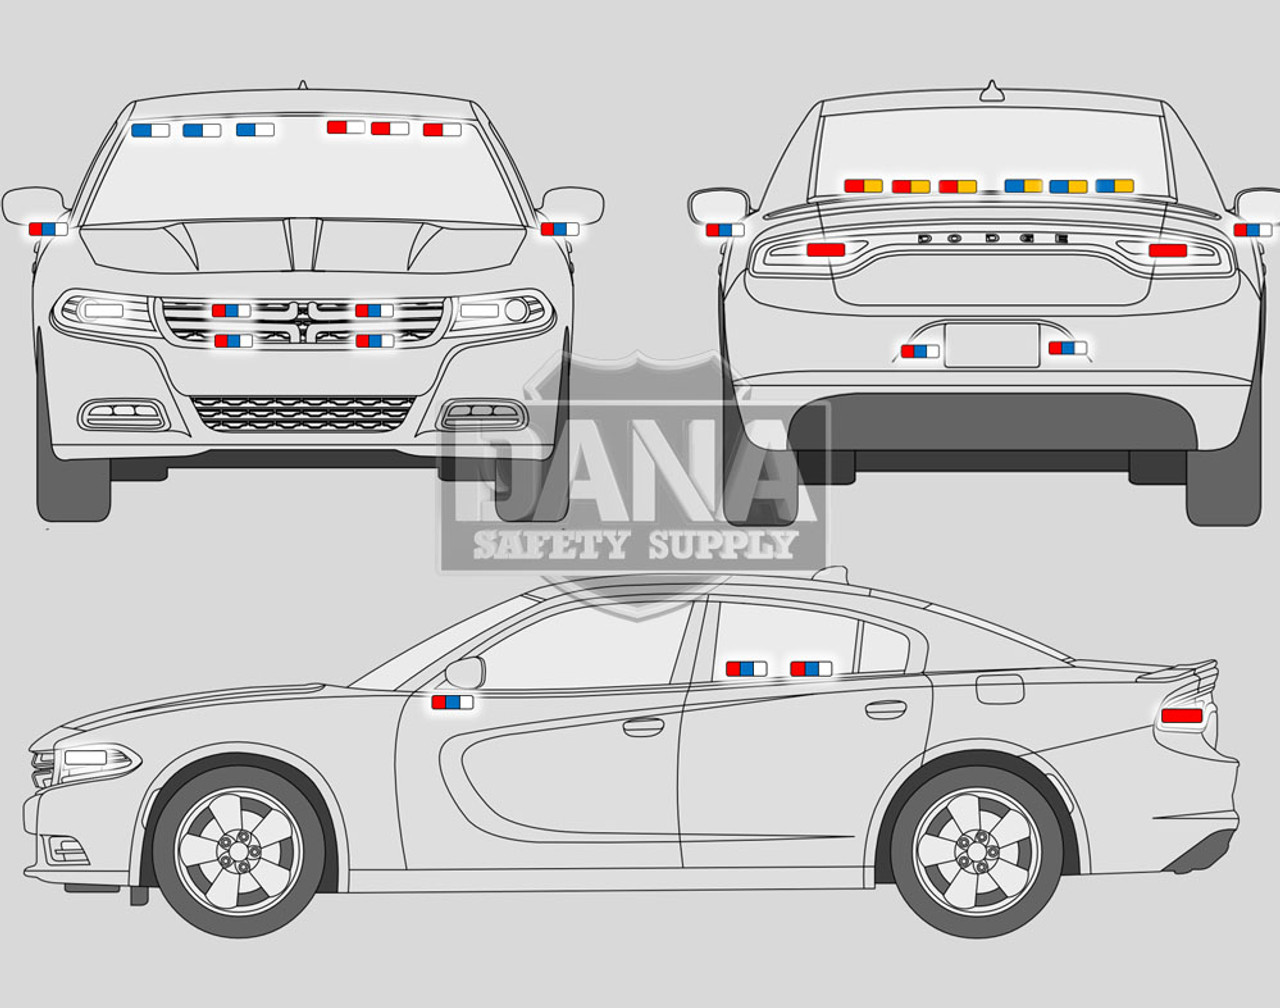 New 2023 Black Dodge Charger PPV V8 RWD ready to be built as an Unmarked Patrol Package Police Pursuit Car (Emergency Lighting, Siren, Controller,  Console, etc.), BCUM2, + Delivery